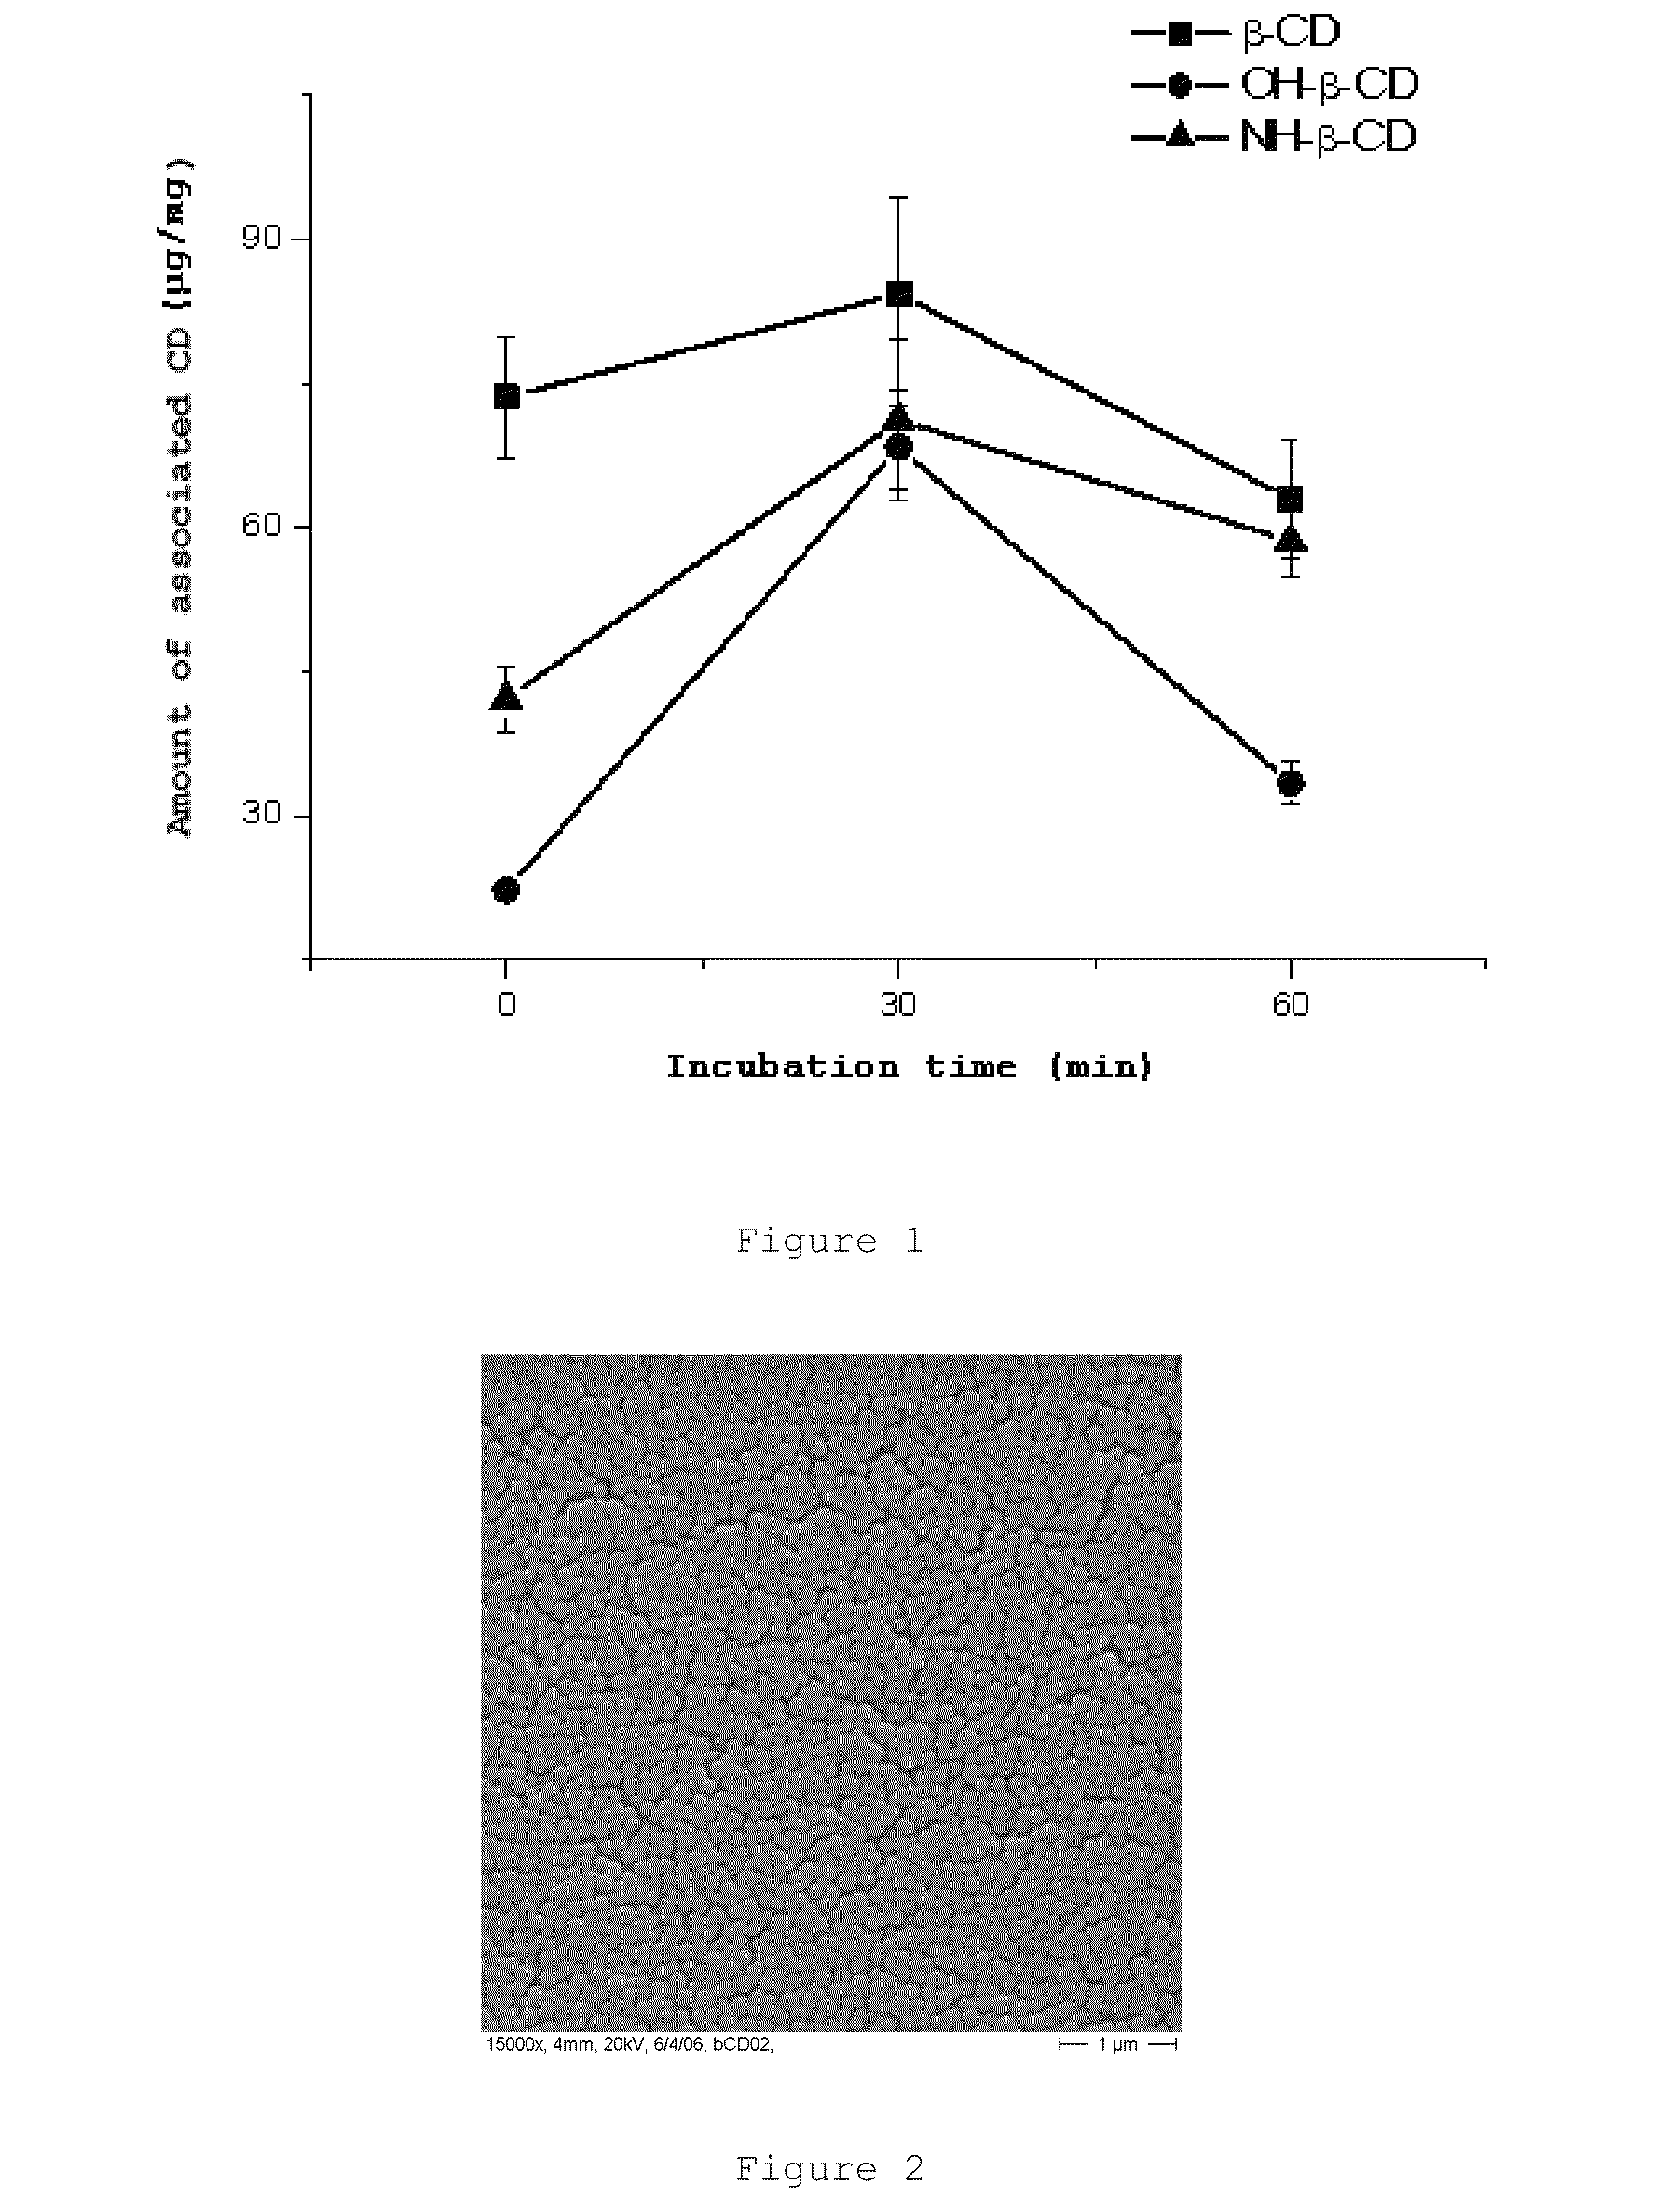 Nanoparticles comprising a cyclodextrin and a biologically active molecule and uses thereof